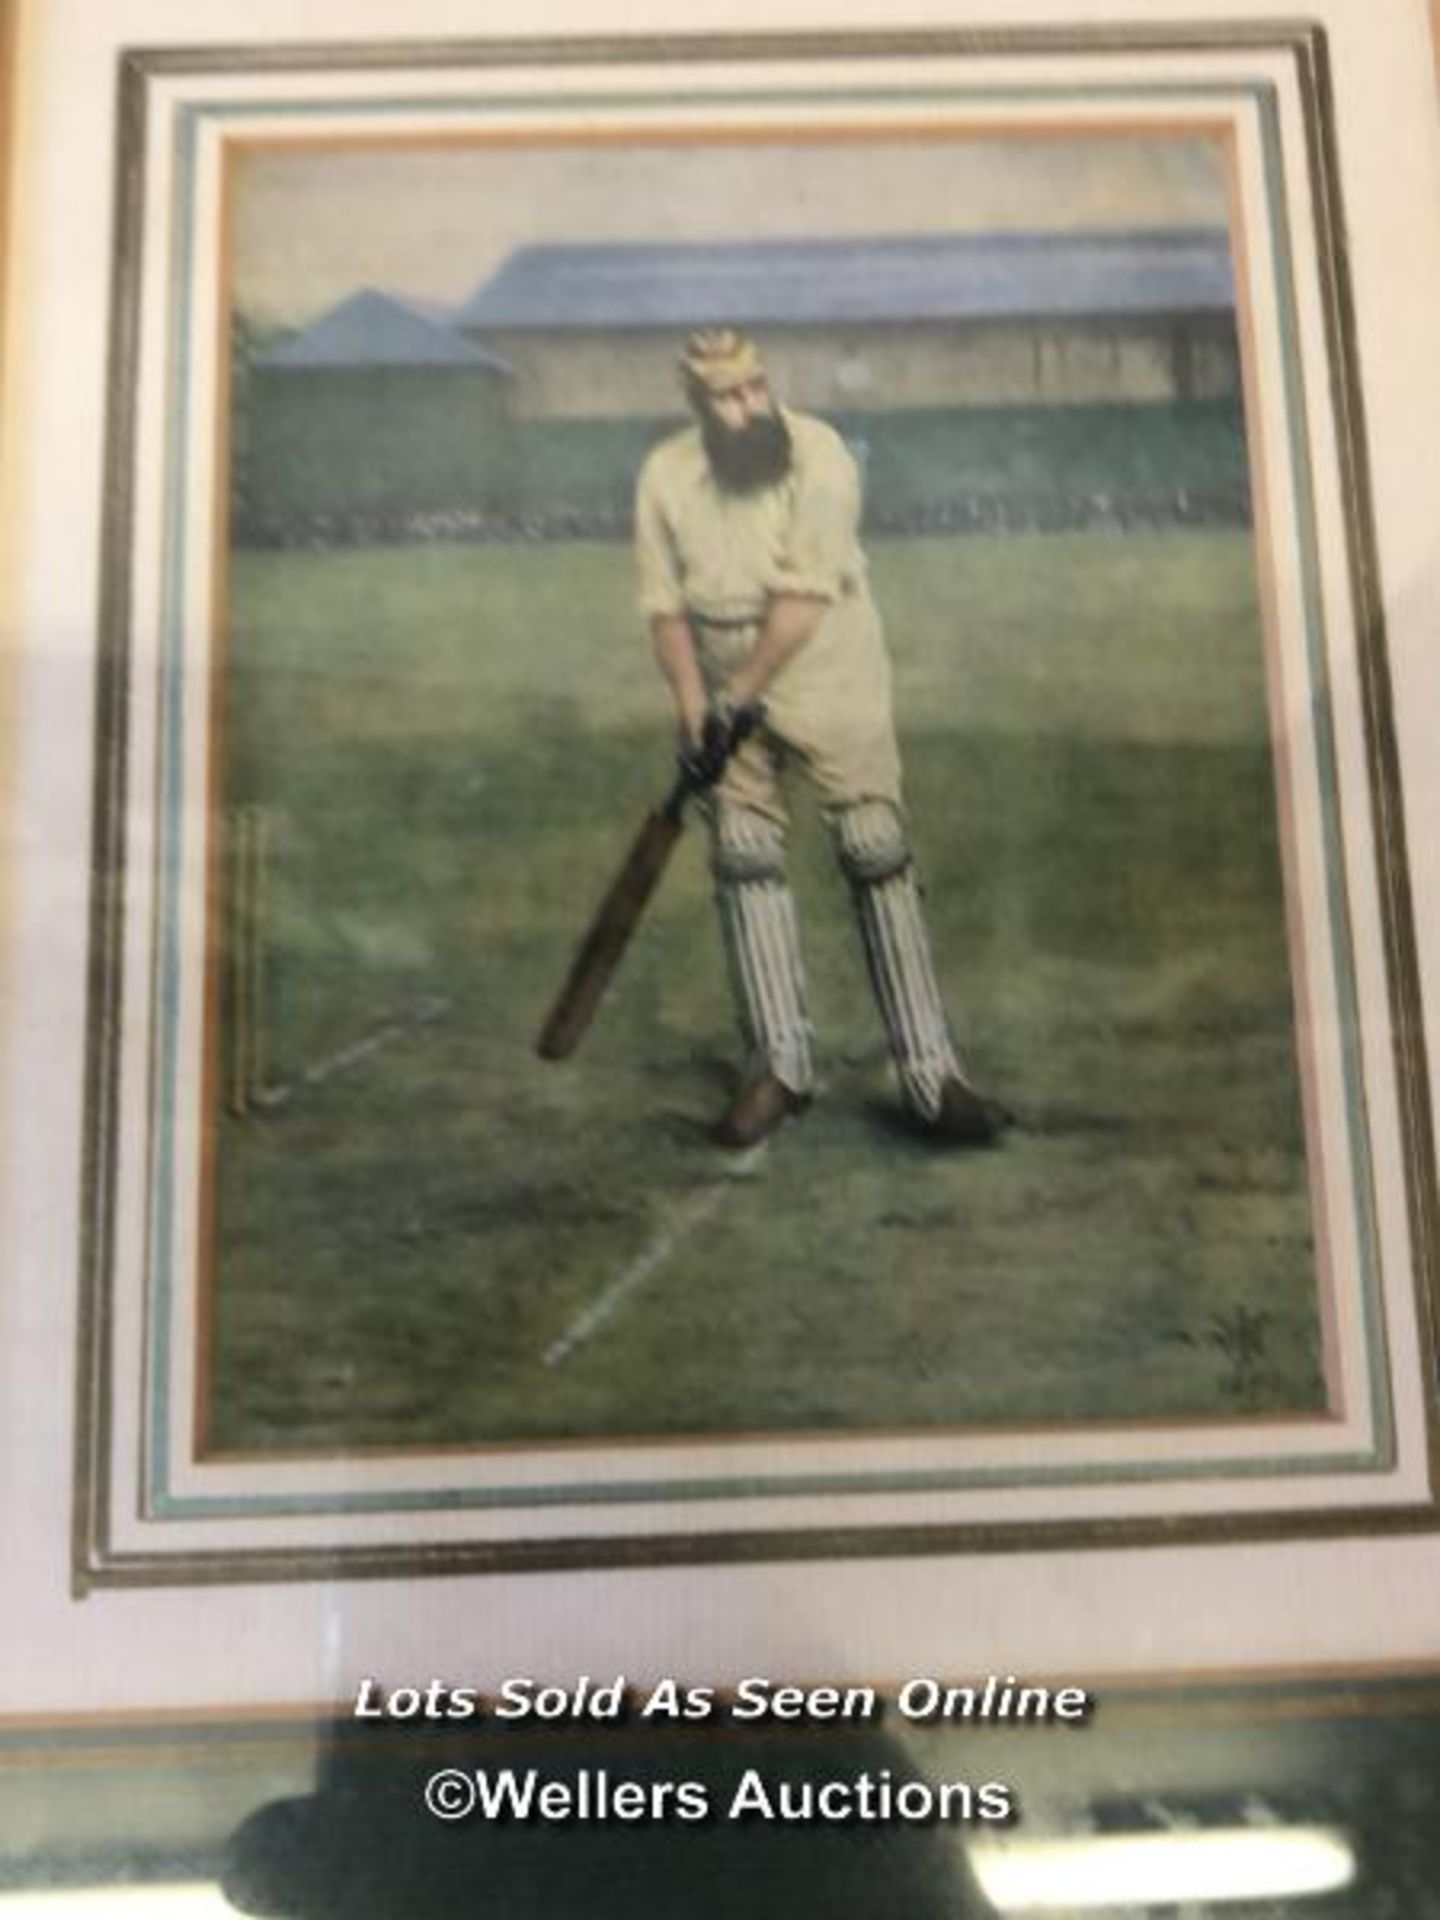 FIVE FRAMED AND GLAZED PRINTS, FOUR OF YOUNG CHILDREN PLAYING CRICKET AND ONE OF W G GRACE (THE - Image 5 of 5